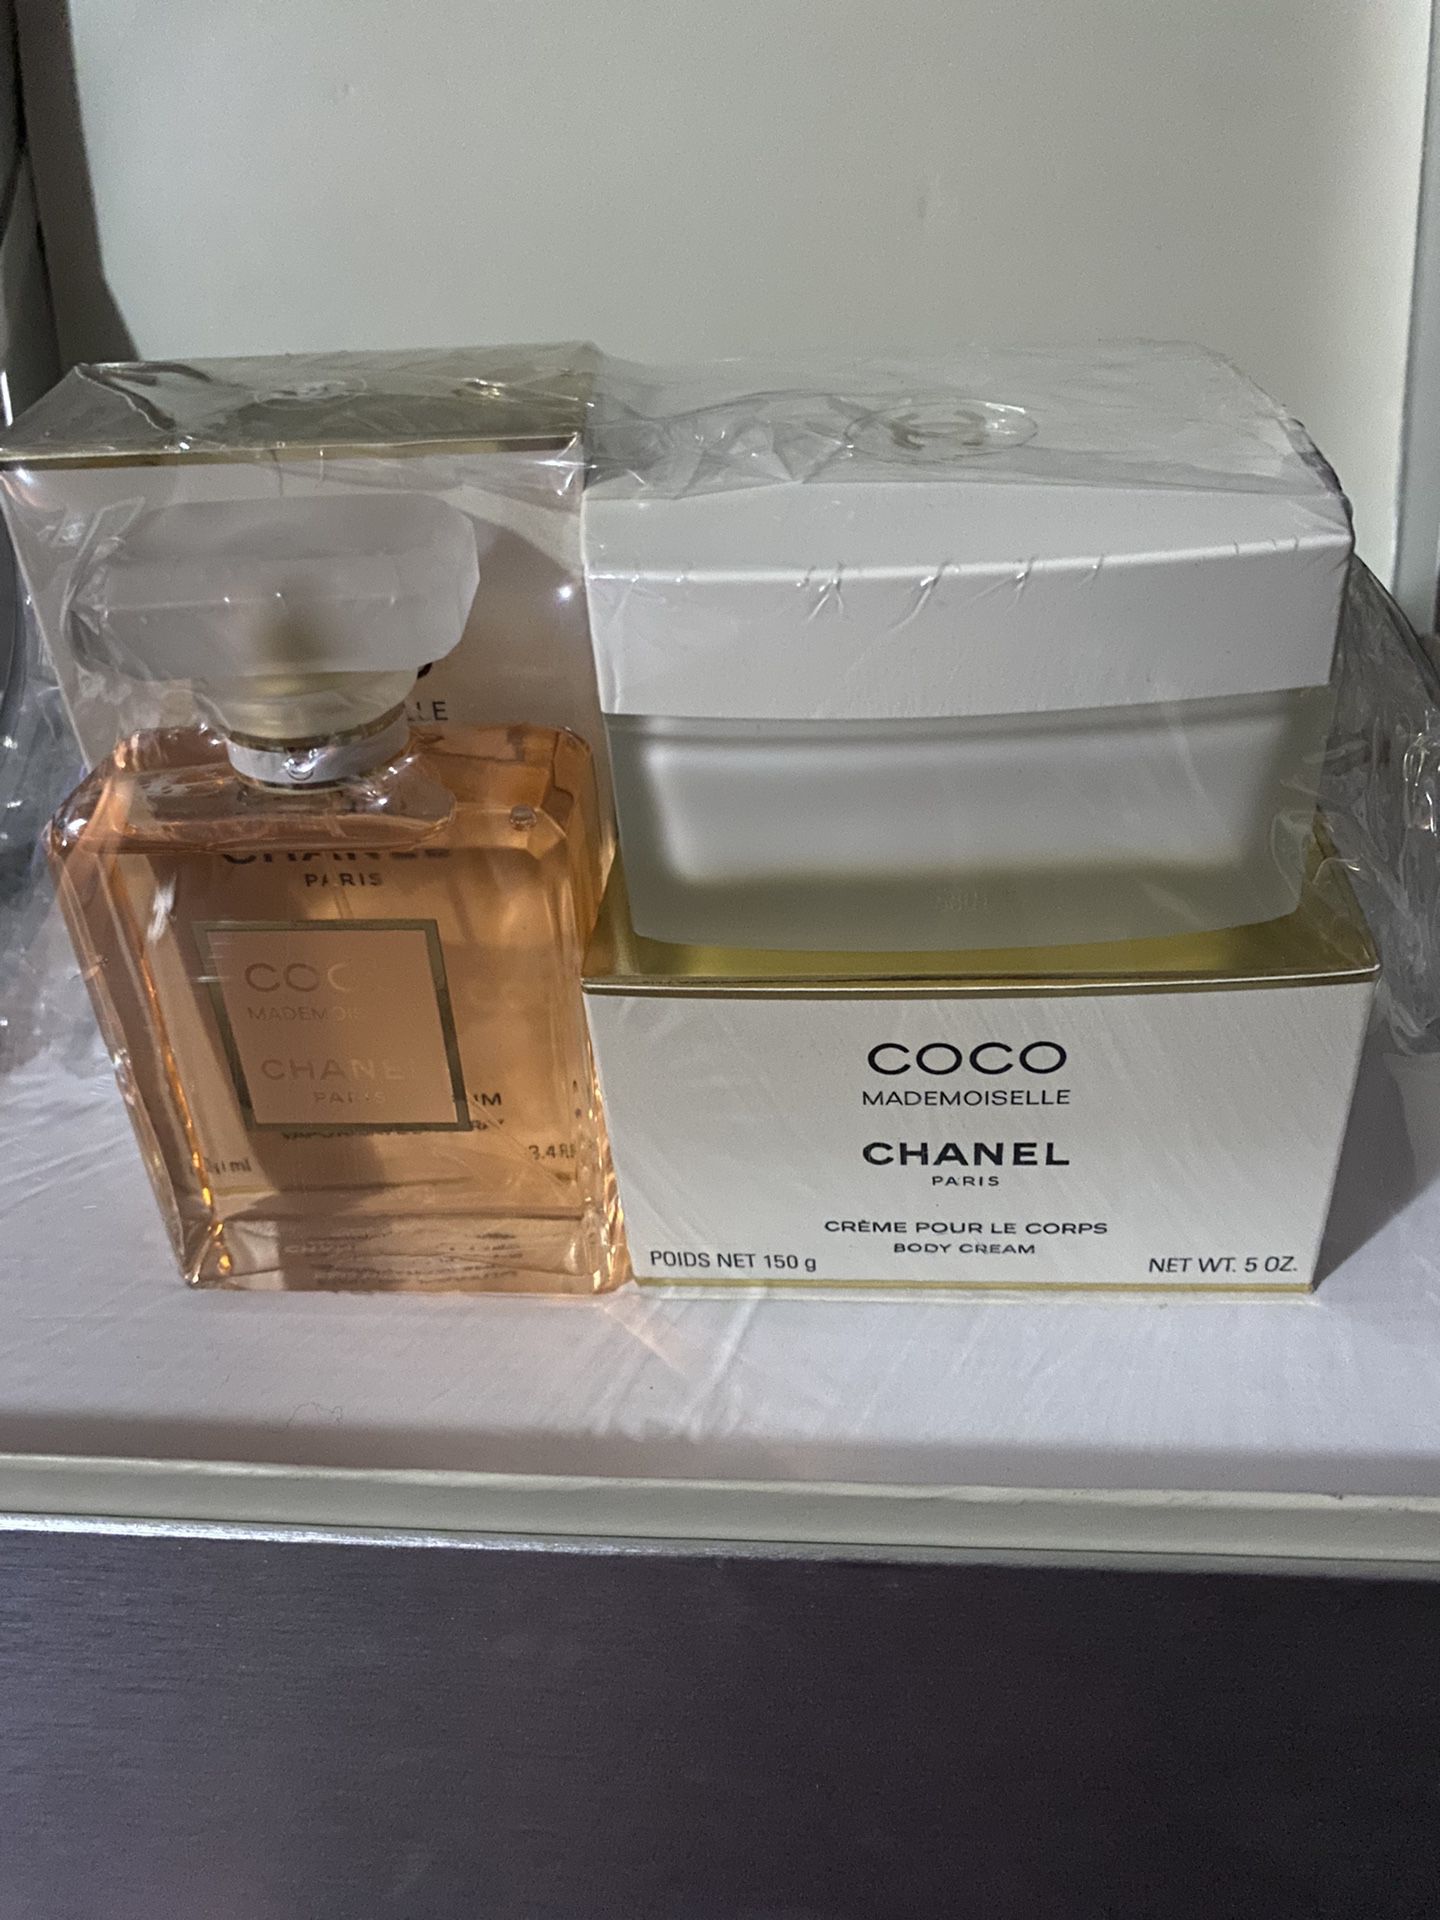 COCO CHANEL MADEMOISELLE SPRAY AND CREAM GIFT SET STILL PLASTIC WRAPPED BRAND NEW